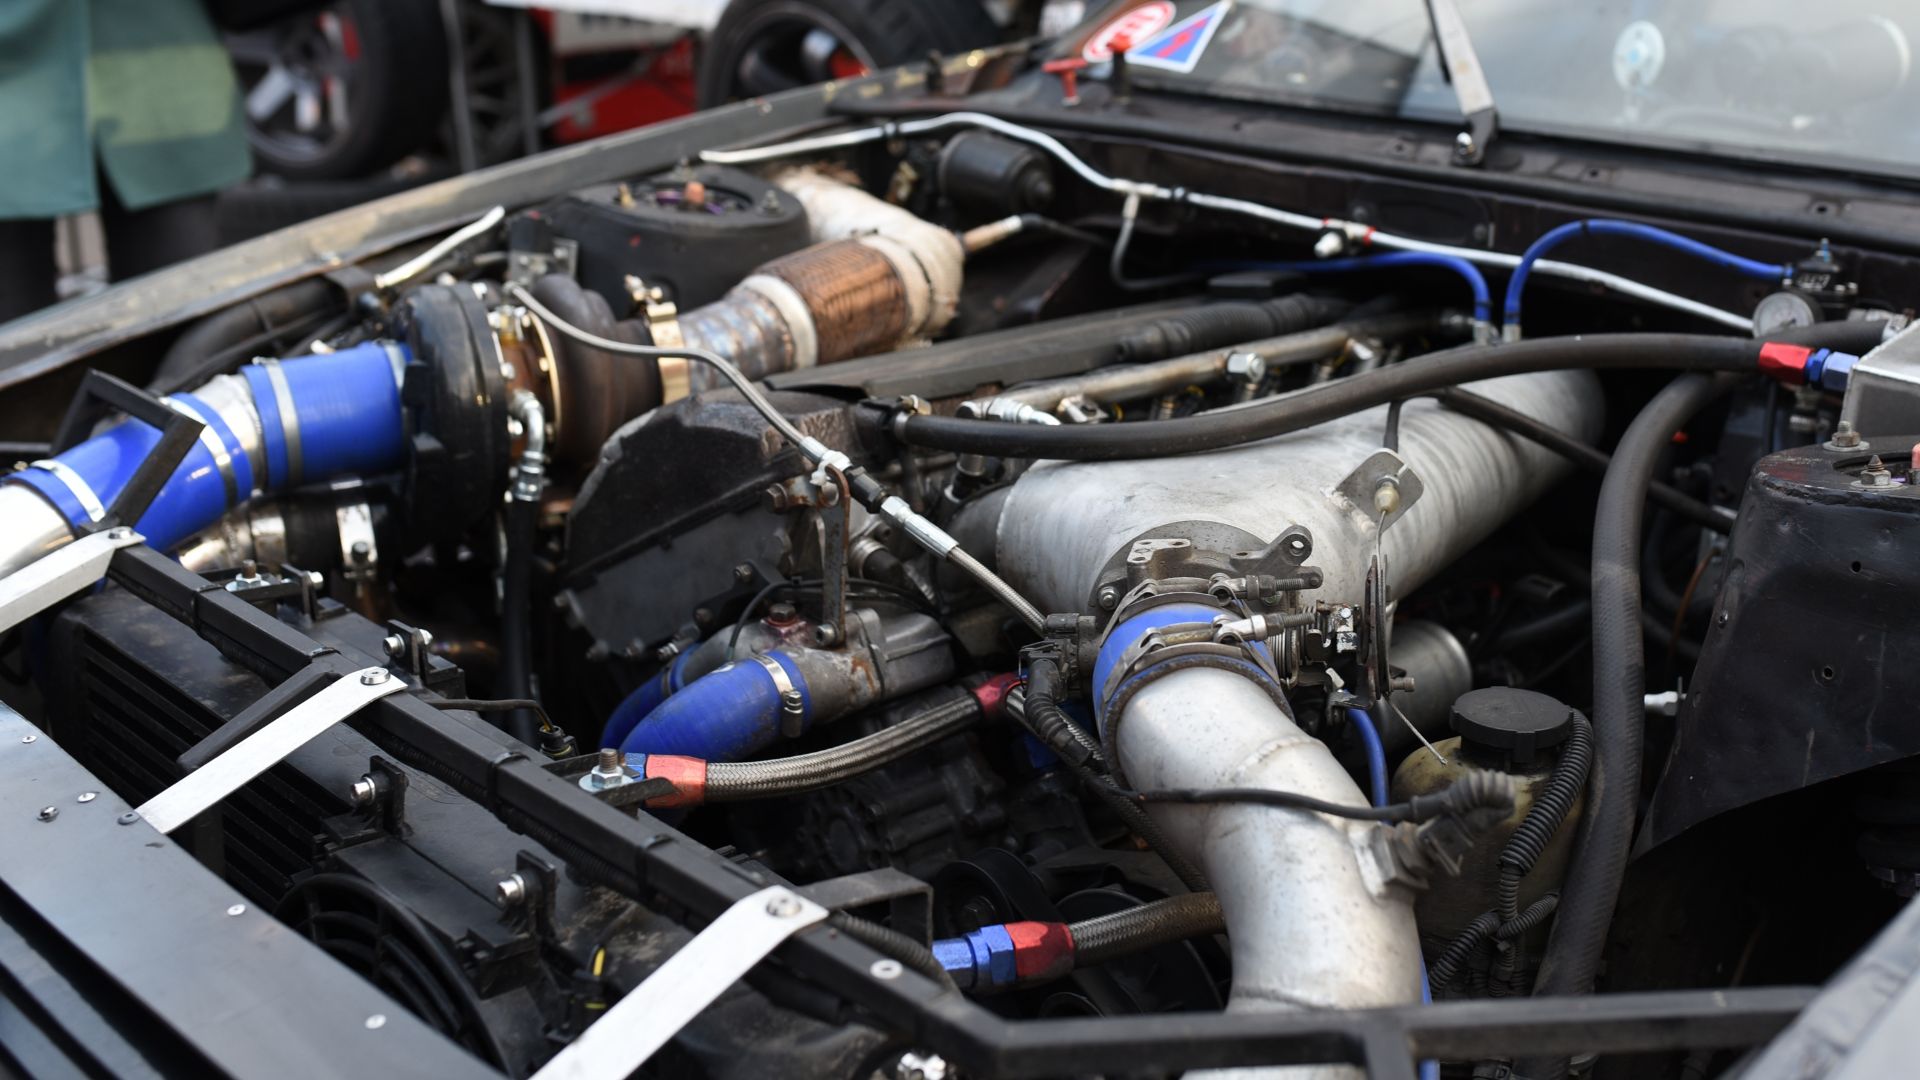 the engine compartment of a car is shown.